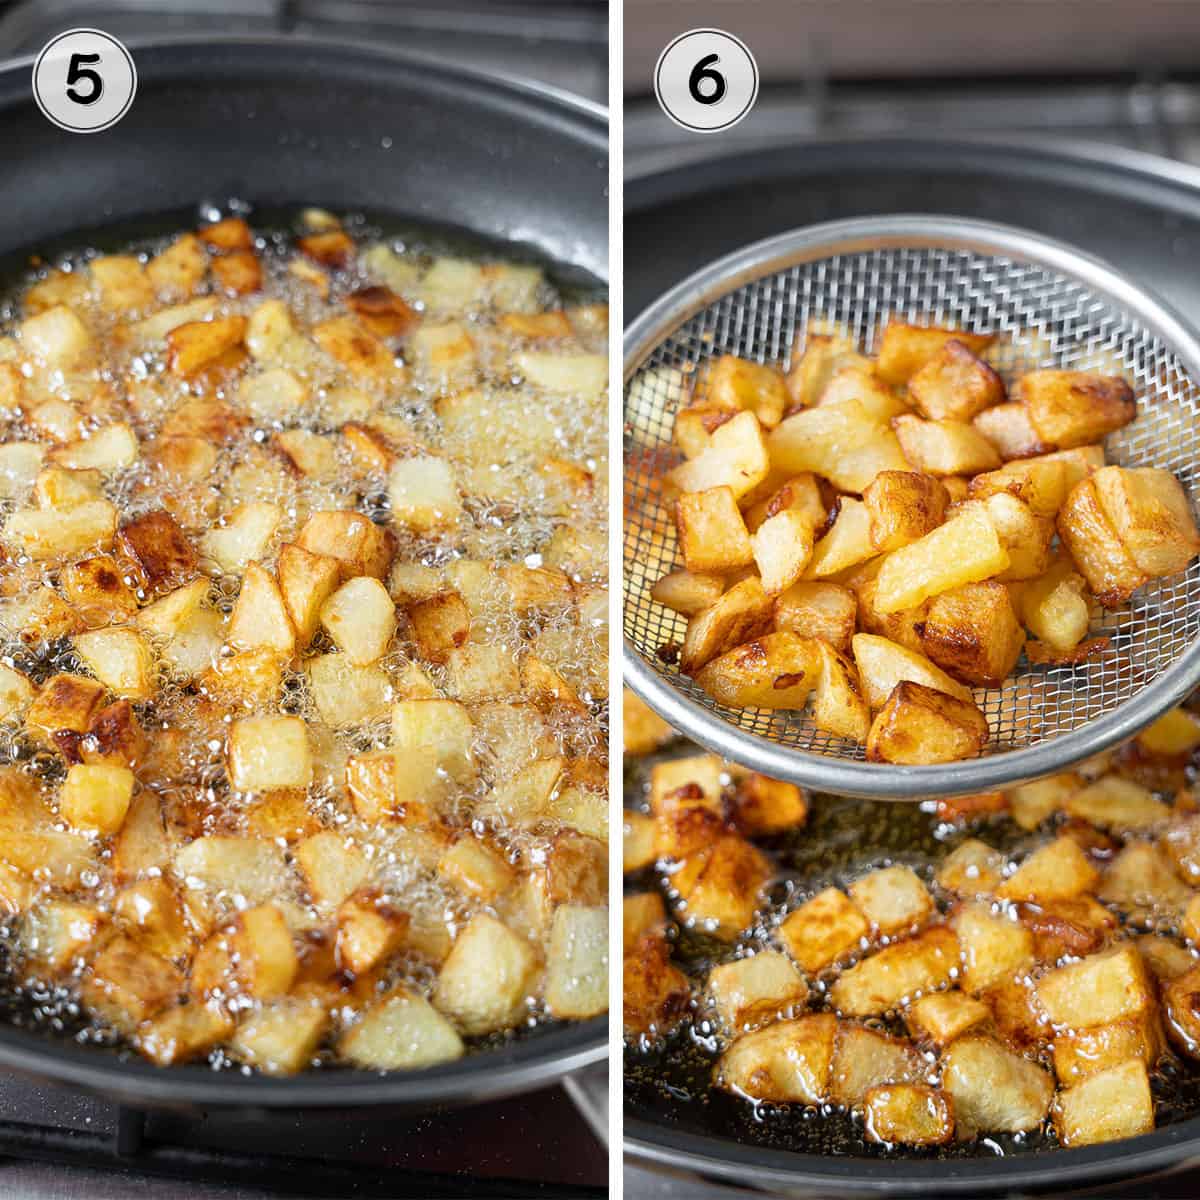 golden brown potato cubes being fried in hot oil and drained.